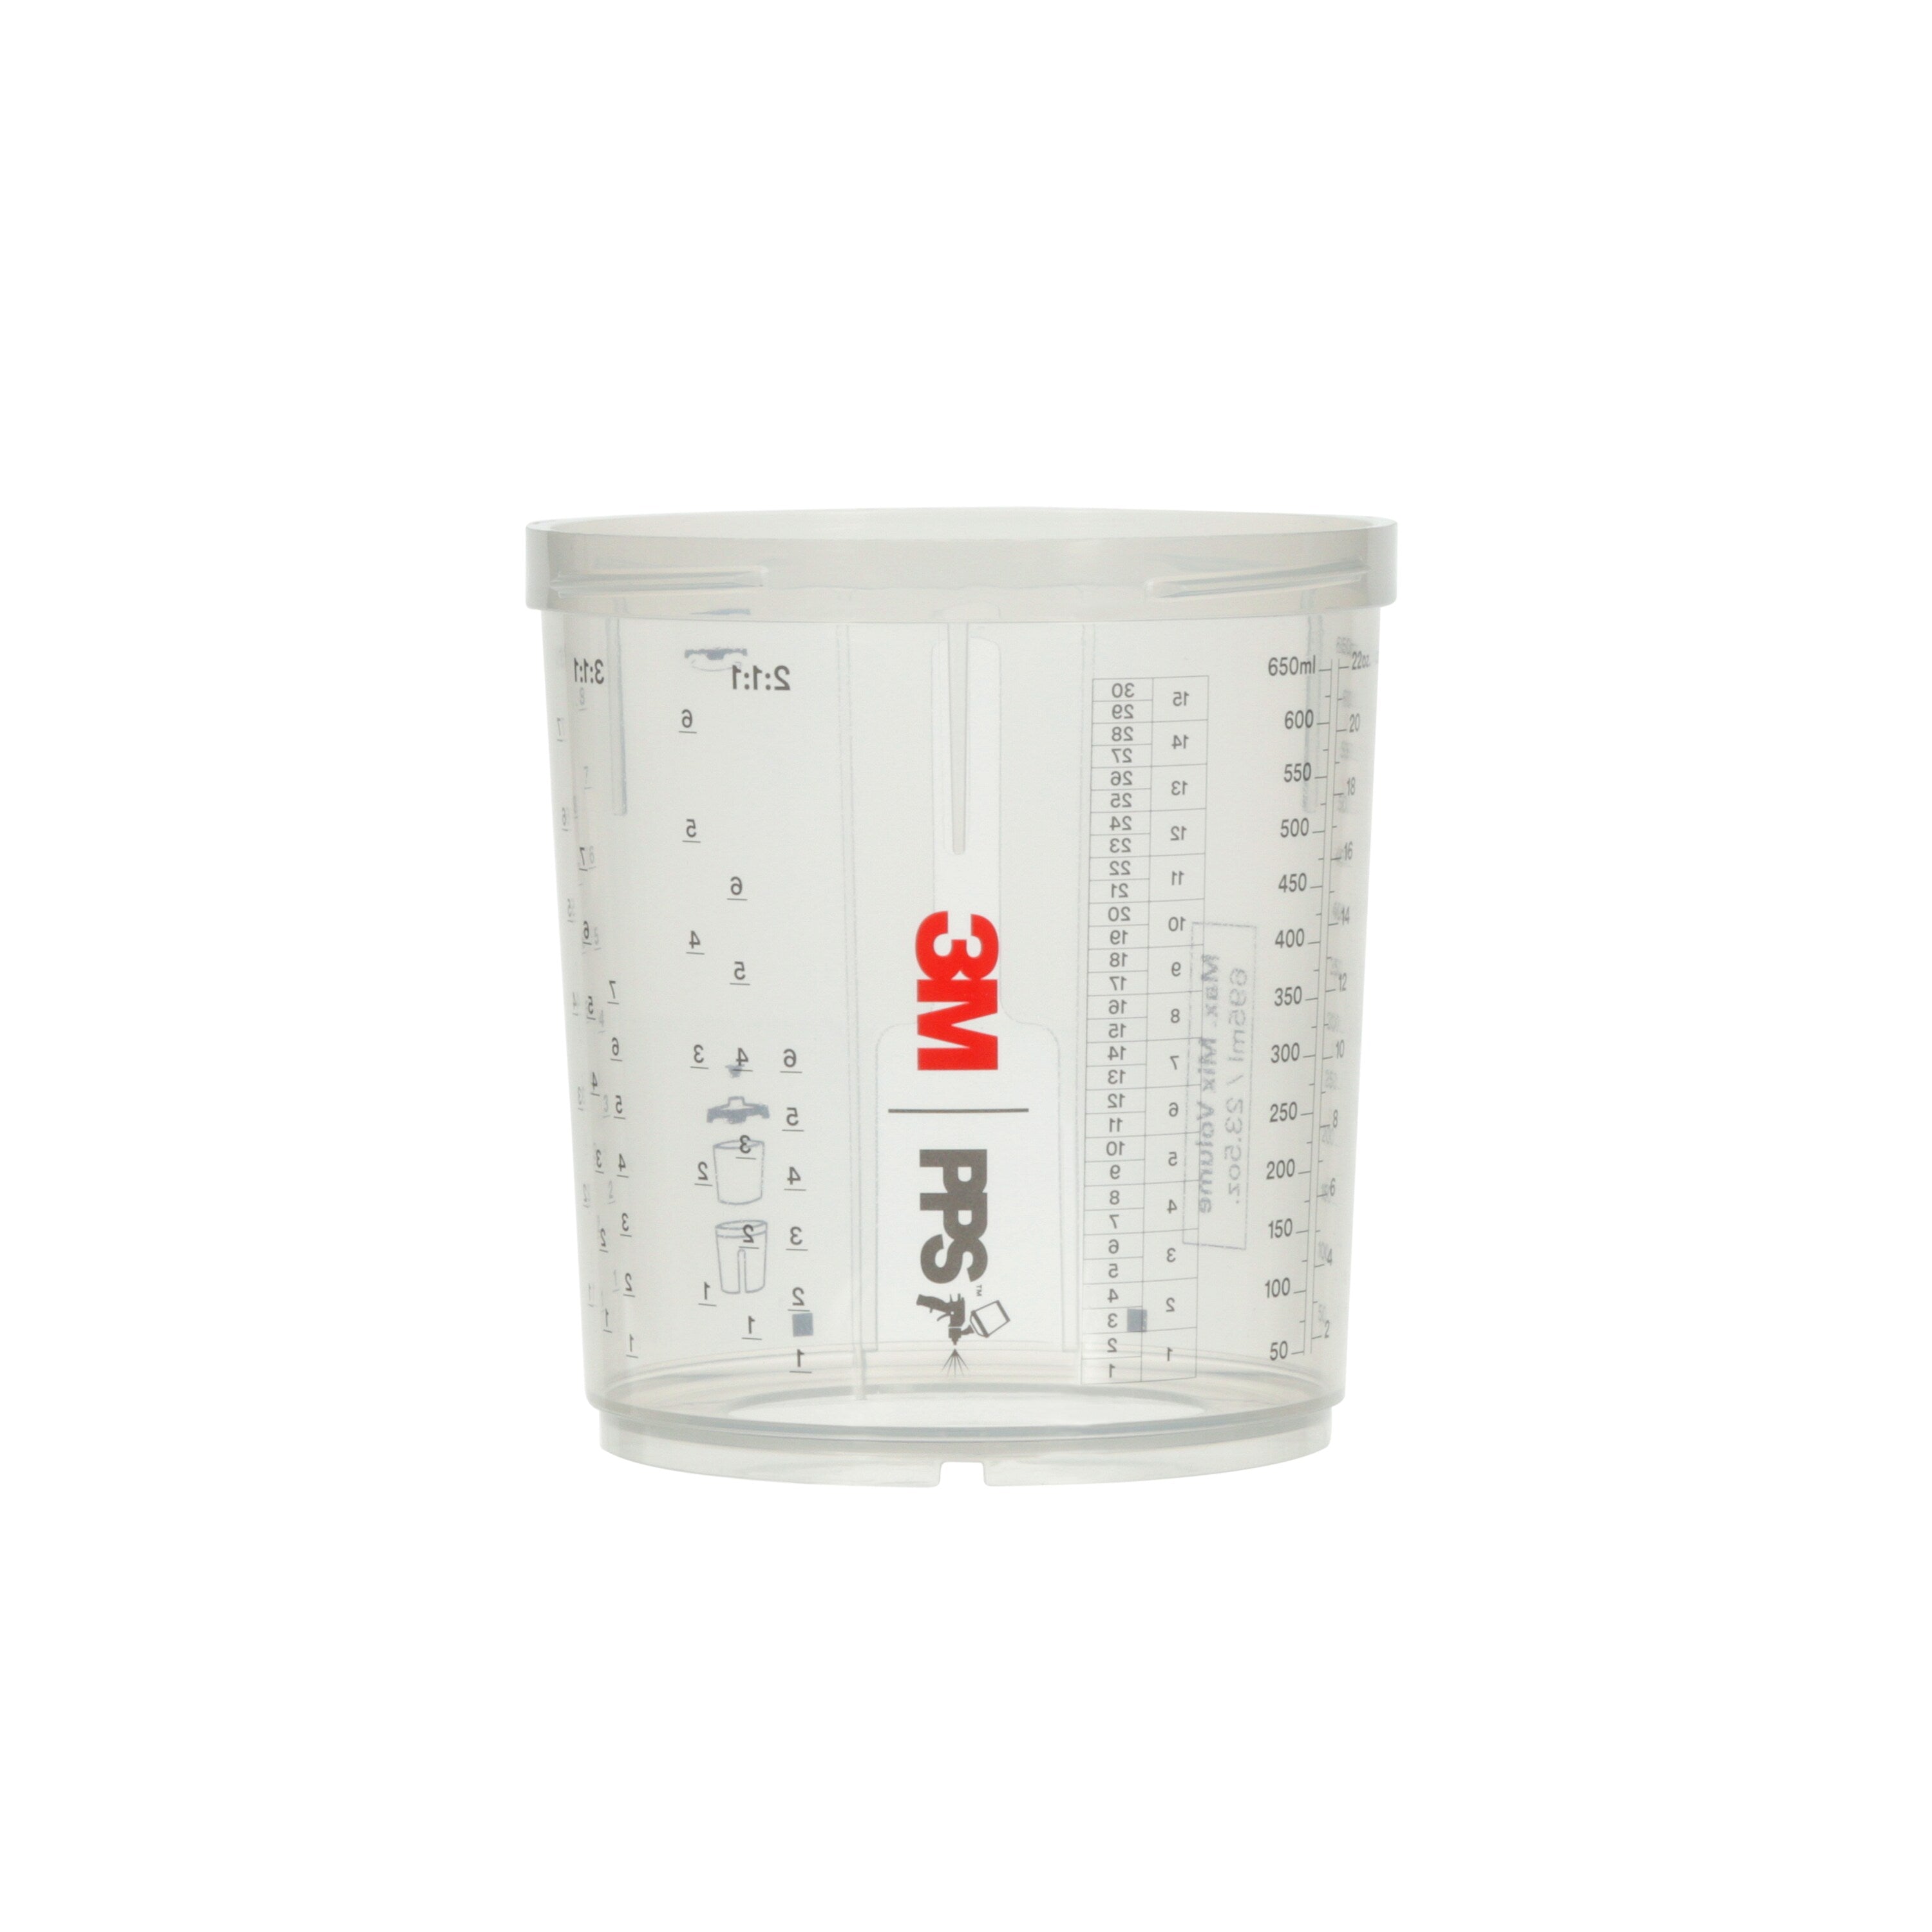 3M™ PPS™ Series 2.0 Cup 26001, Standard 22 fl oz, 2 Cups